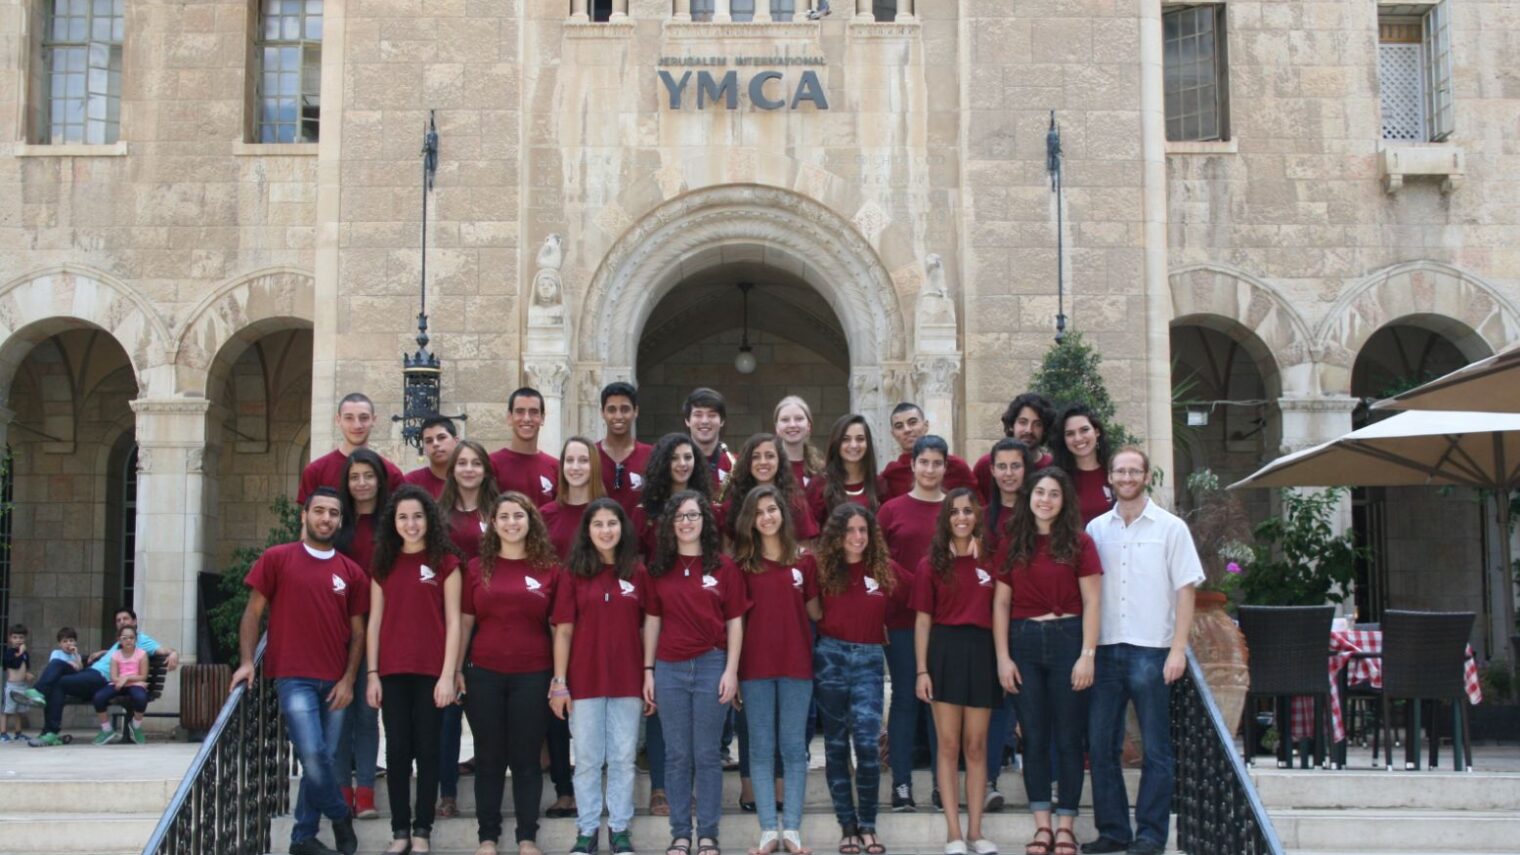 Members of the Jerusalem Youth Chorus in front of their home base, the International YMCA in Jerusalem. Photo: courtesy